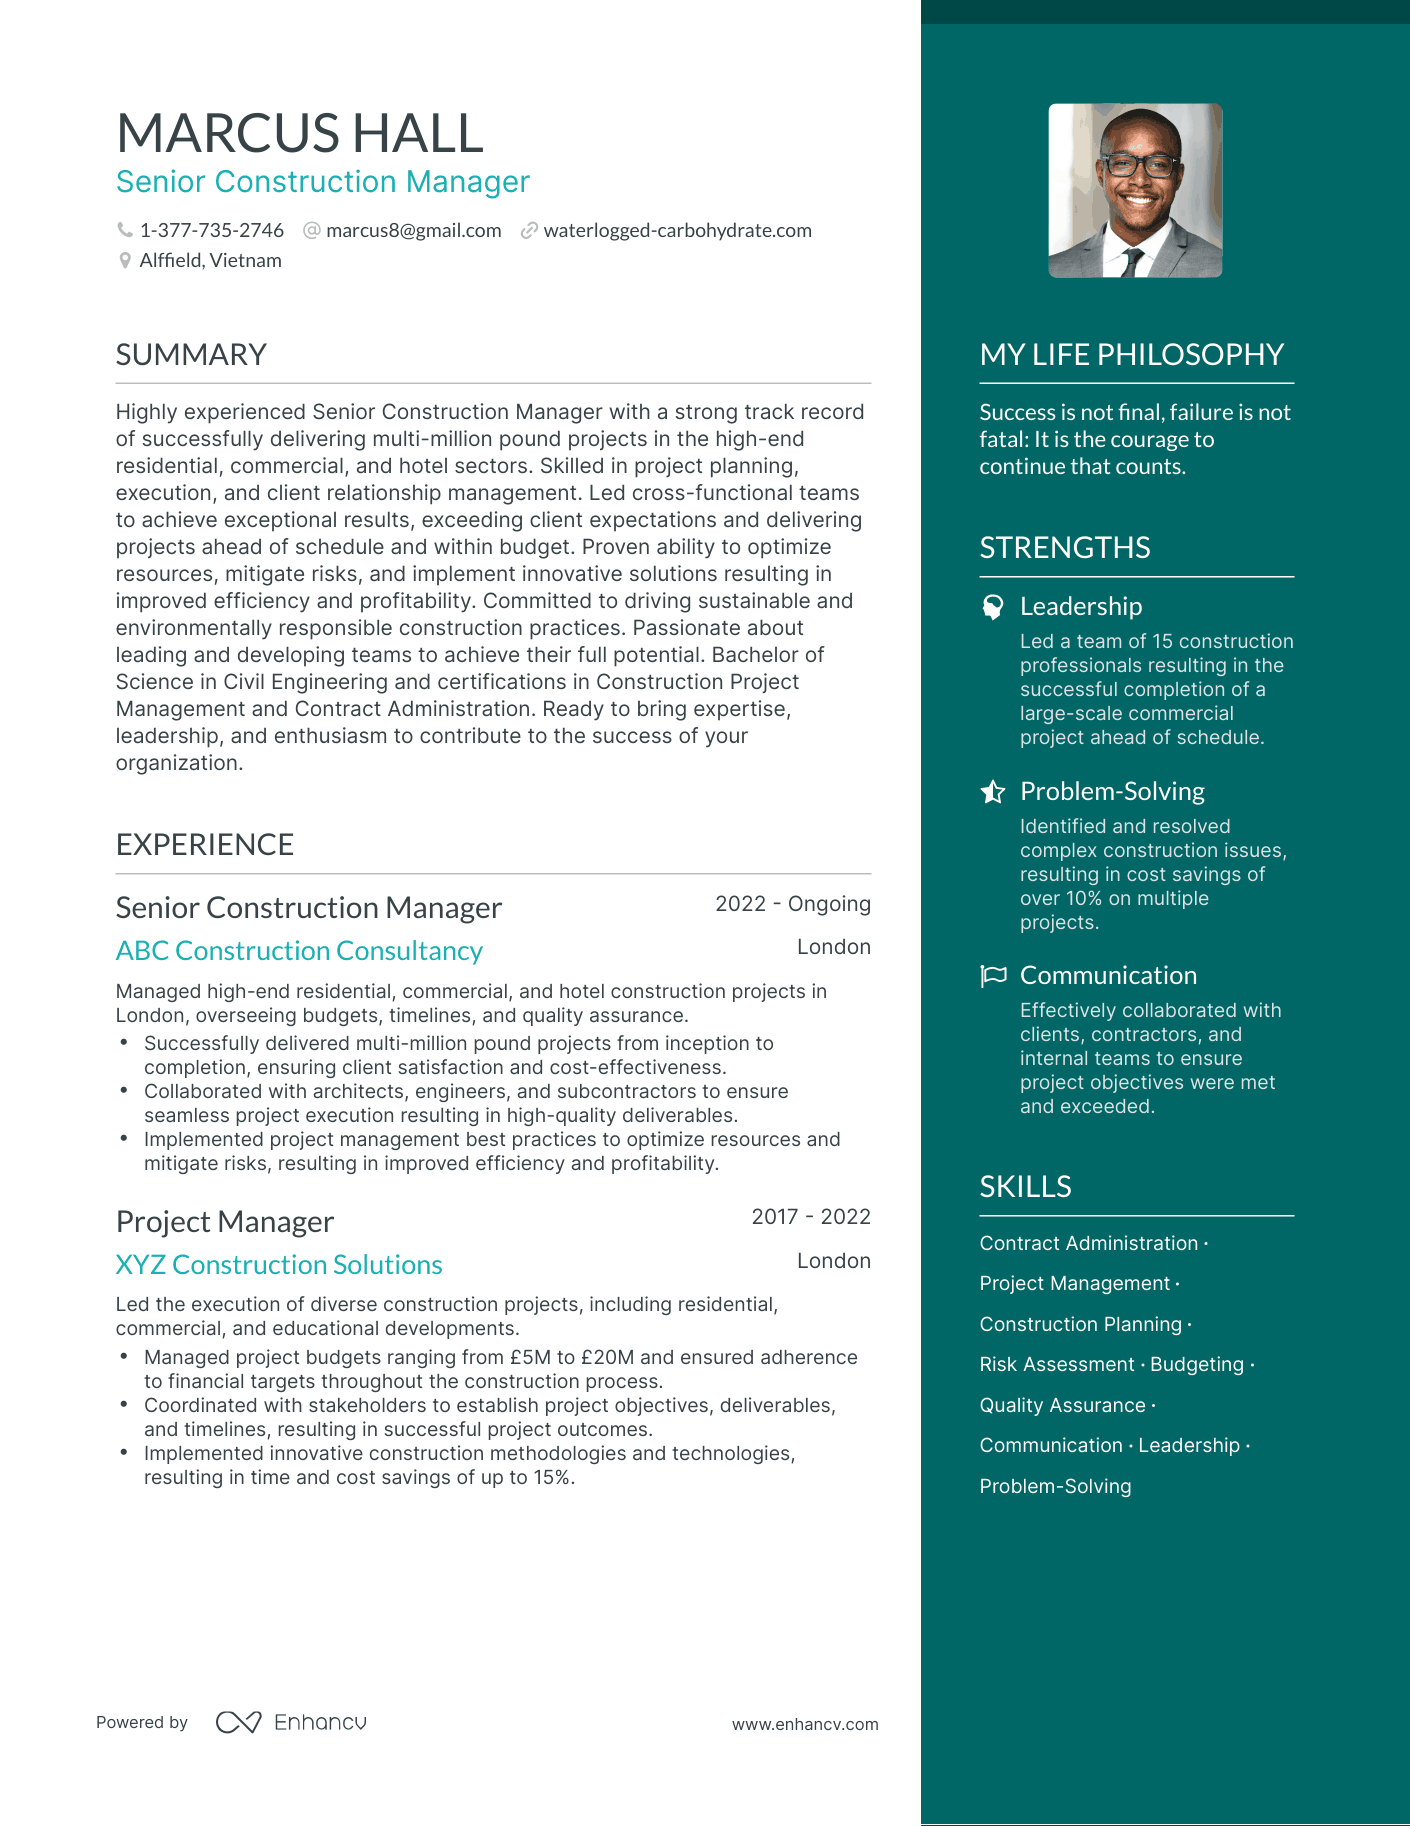 Senior Construction Manager resume example